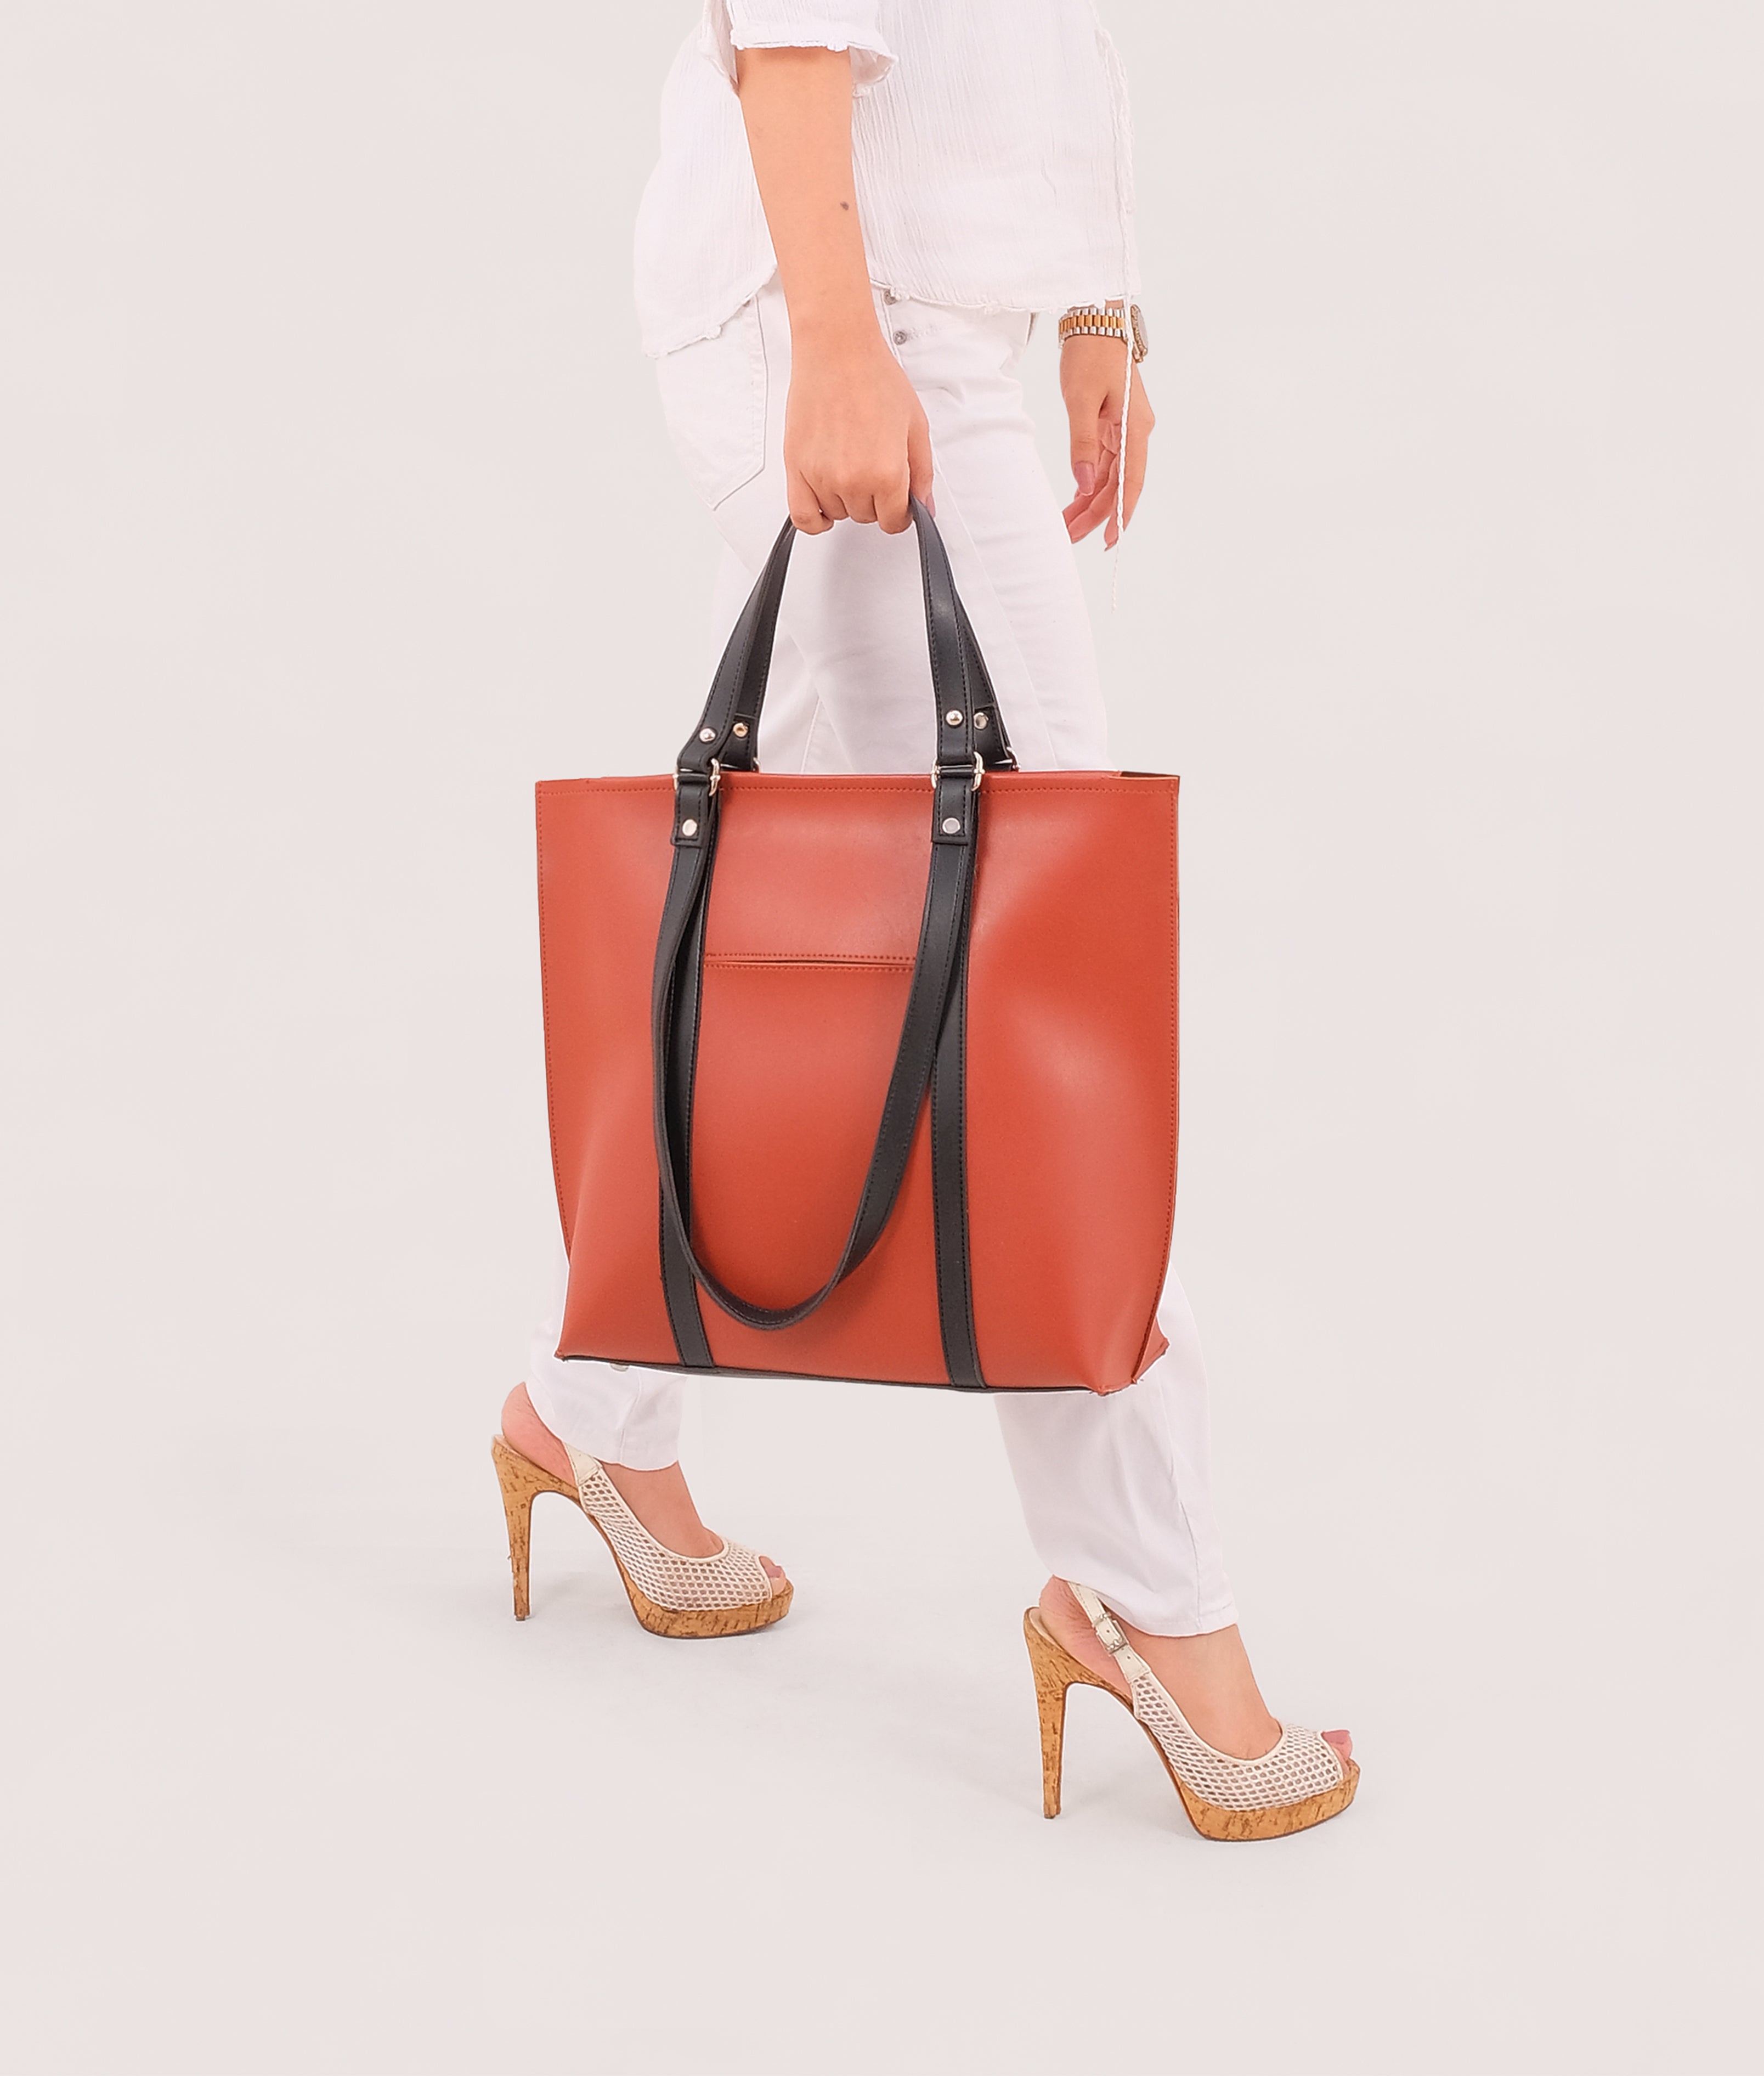 Rust and black double-handle tote bag